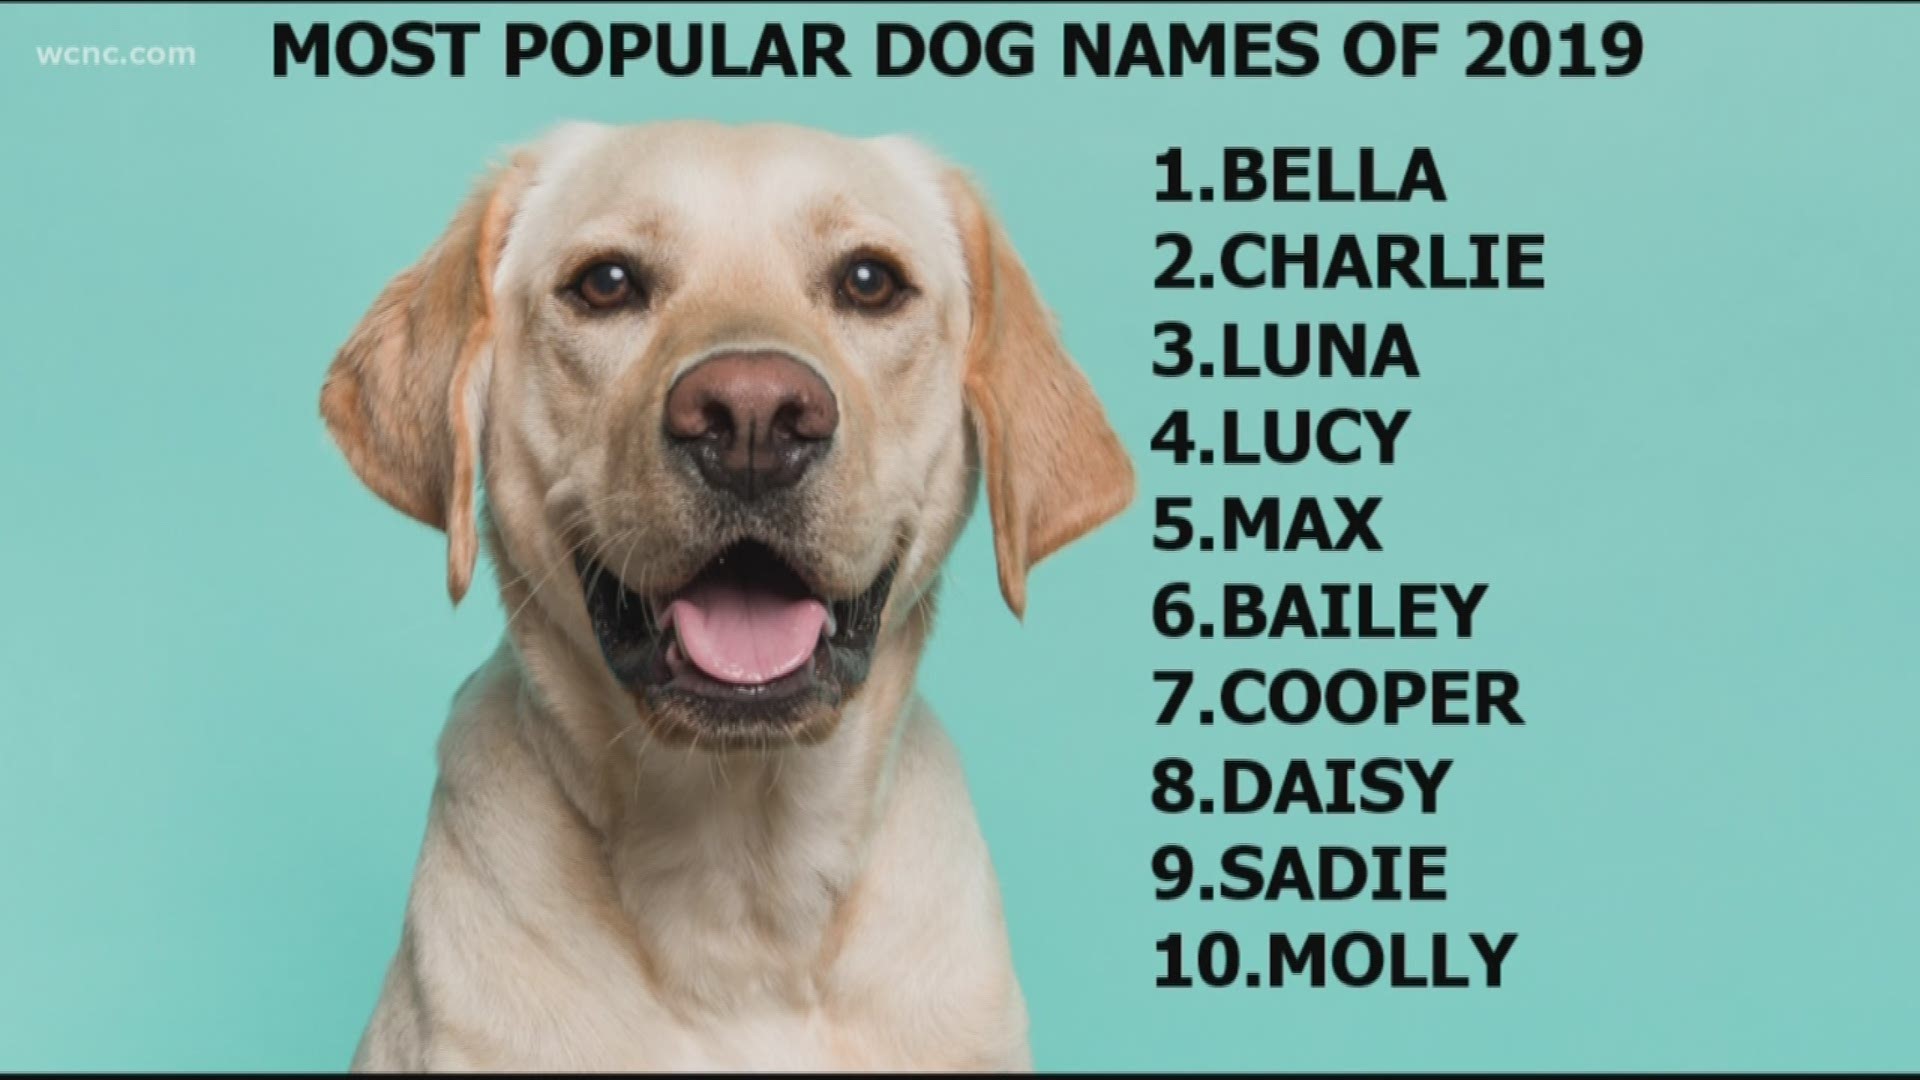 Monday is National Dog Day, and in honor of the special occasion, these are the most popular puppy names of 2019!